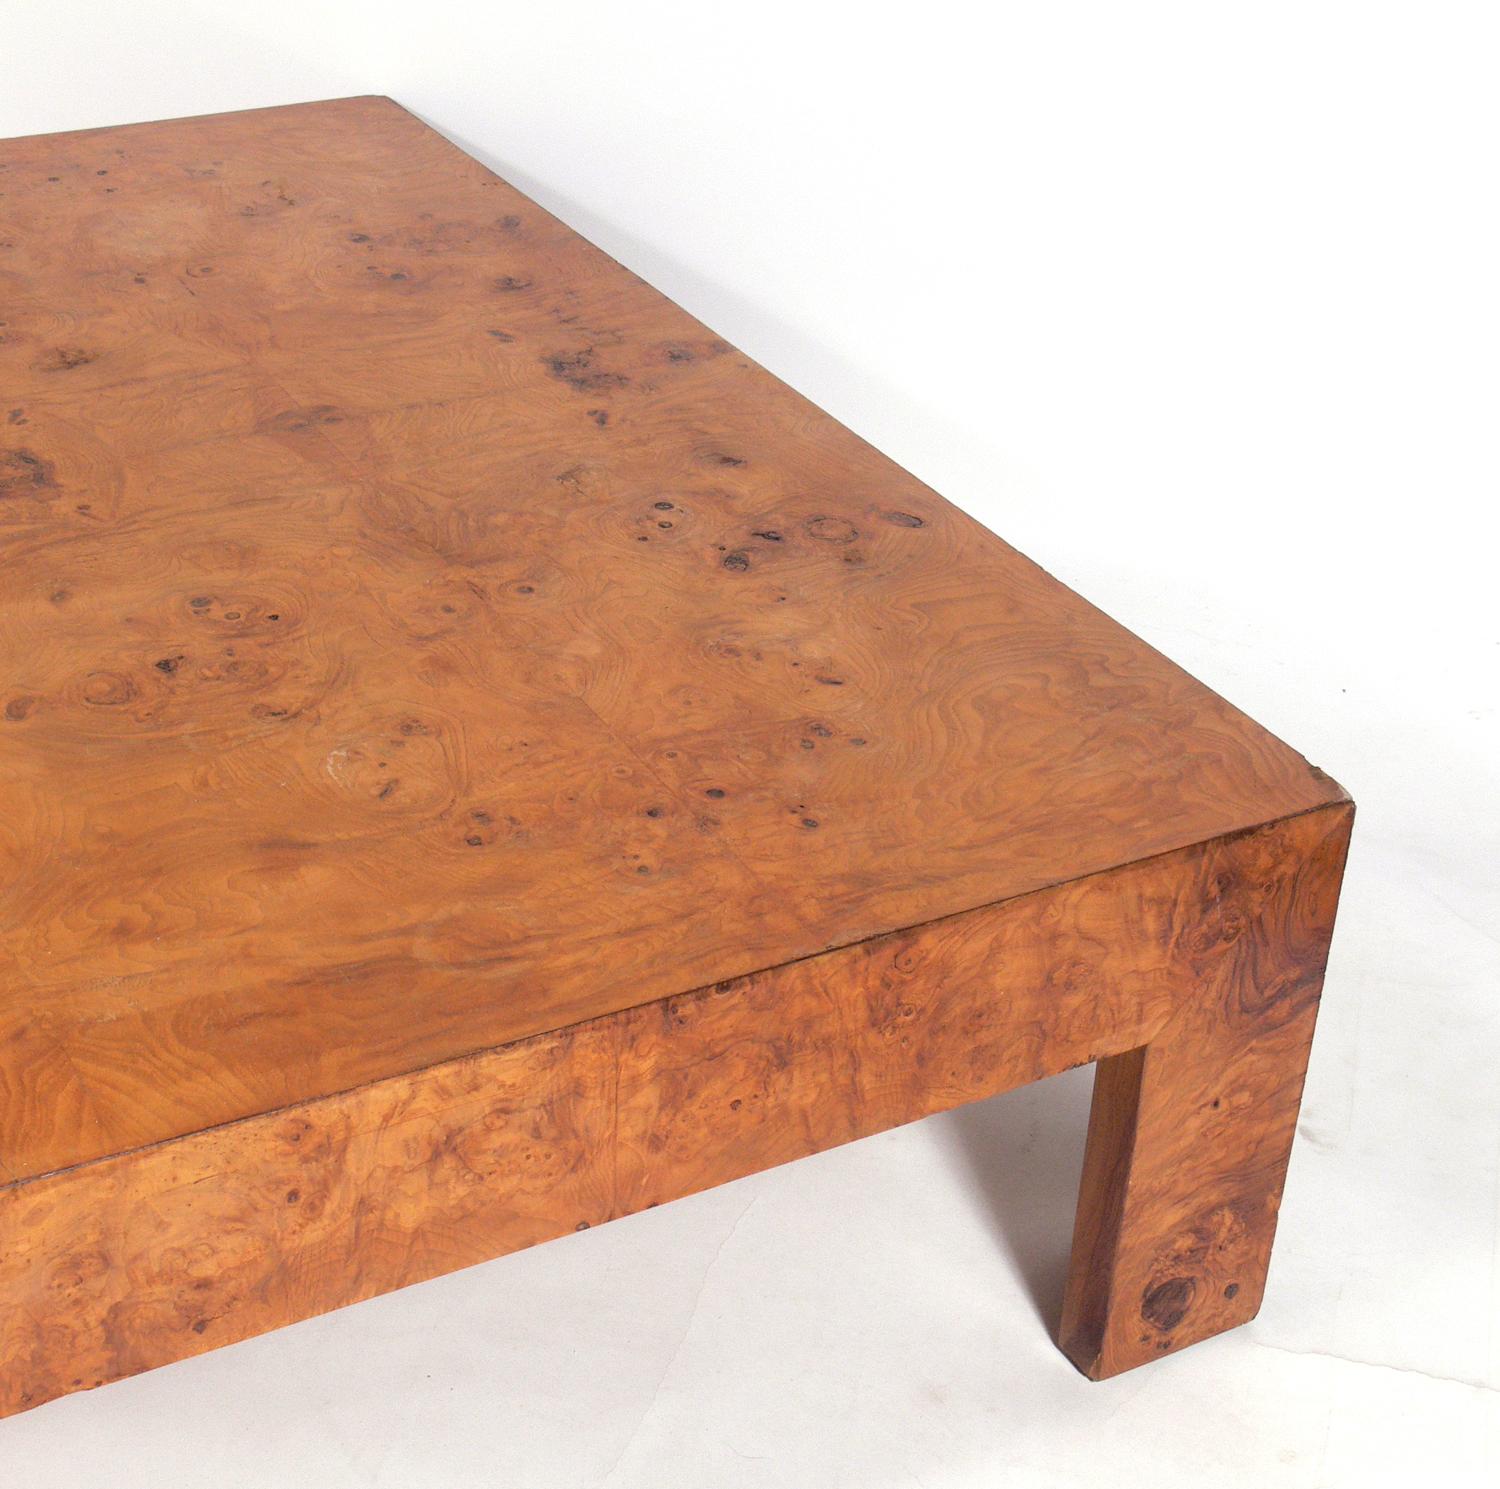 Large-scale burl wood coffee table, designed by Milo Baughman for Thayer Coggin, American, circa 1960s. This large-scale table was made for entertaining and the burled wood graining is beautiful. It is currently being refinished and can be completed